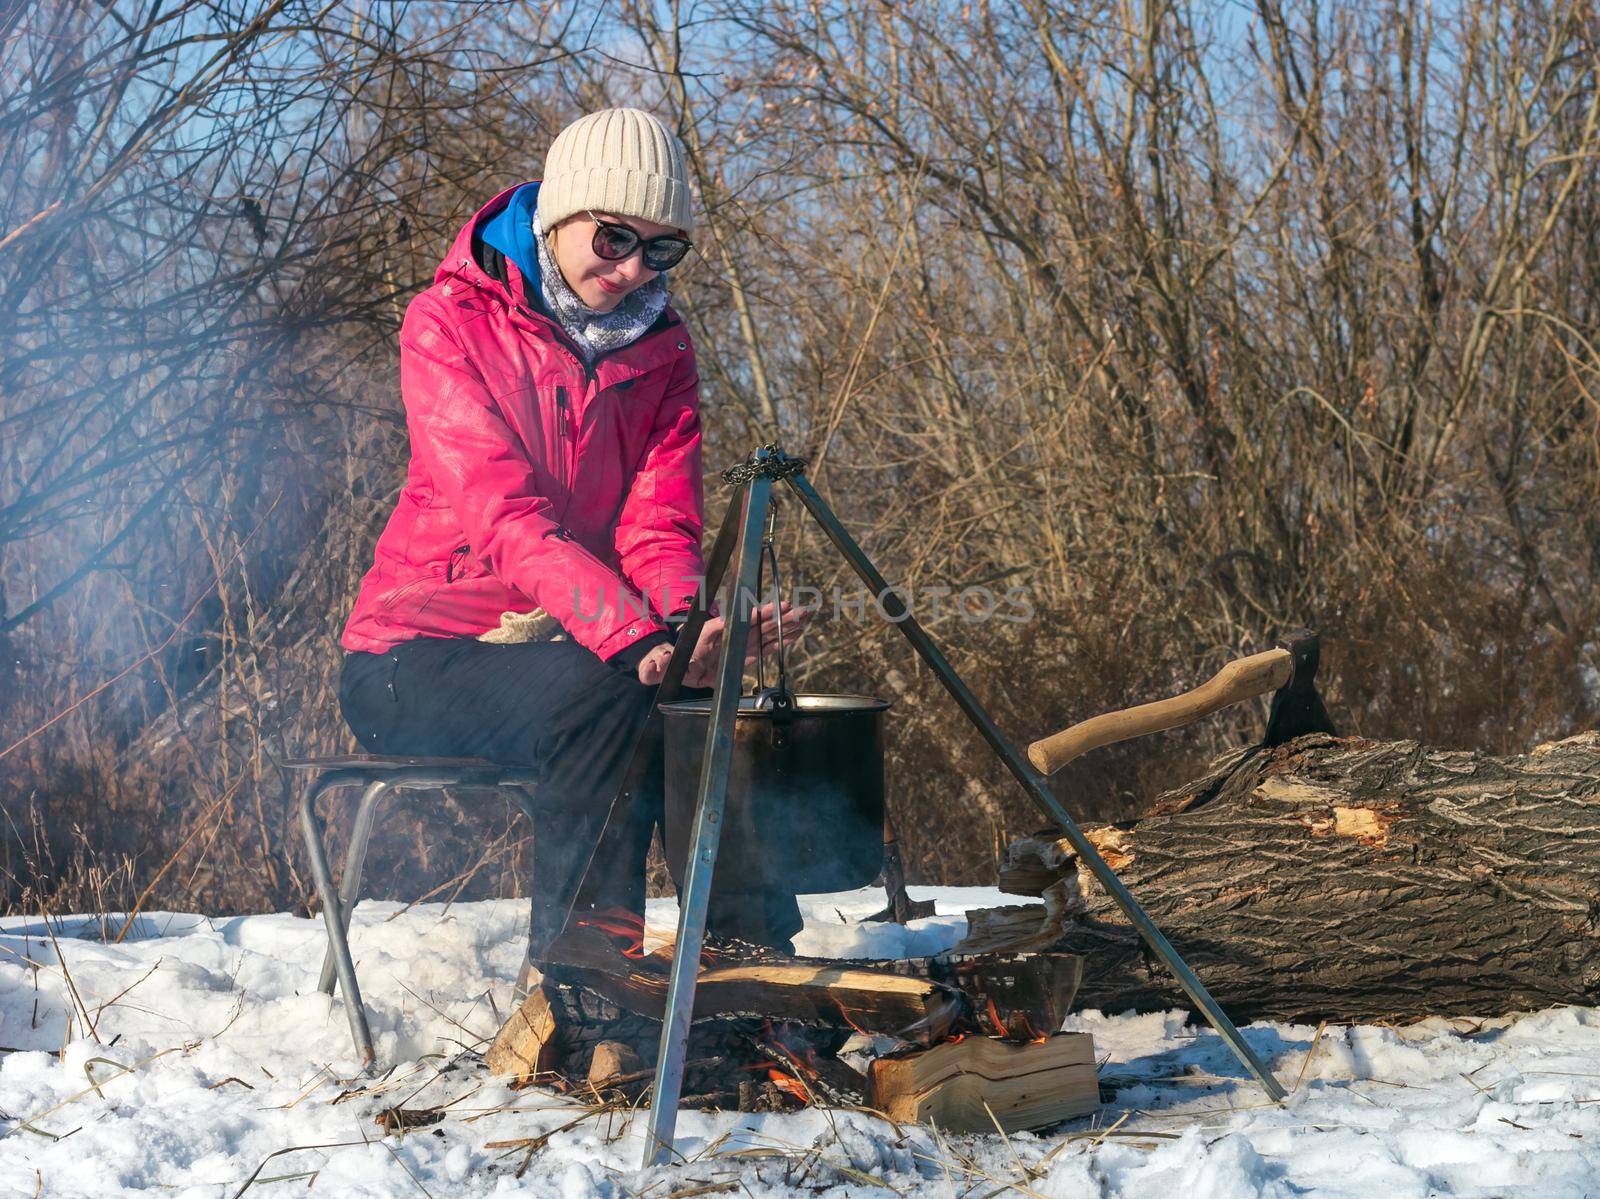 Female caucasian in pink jacket with sunglasses warms her hands by campfire, pot of soot over bonfire hanging on tripod, ax in tree trunk on backdrop, winter outdoor cooking at campsite, lifestyle